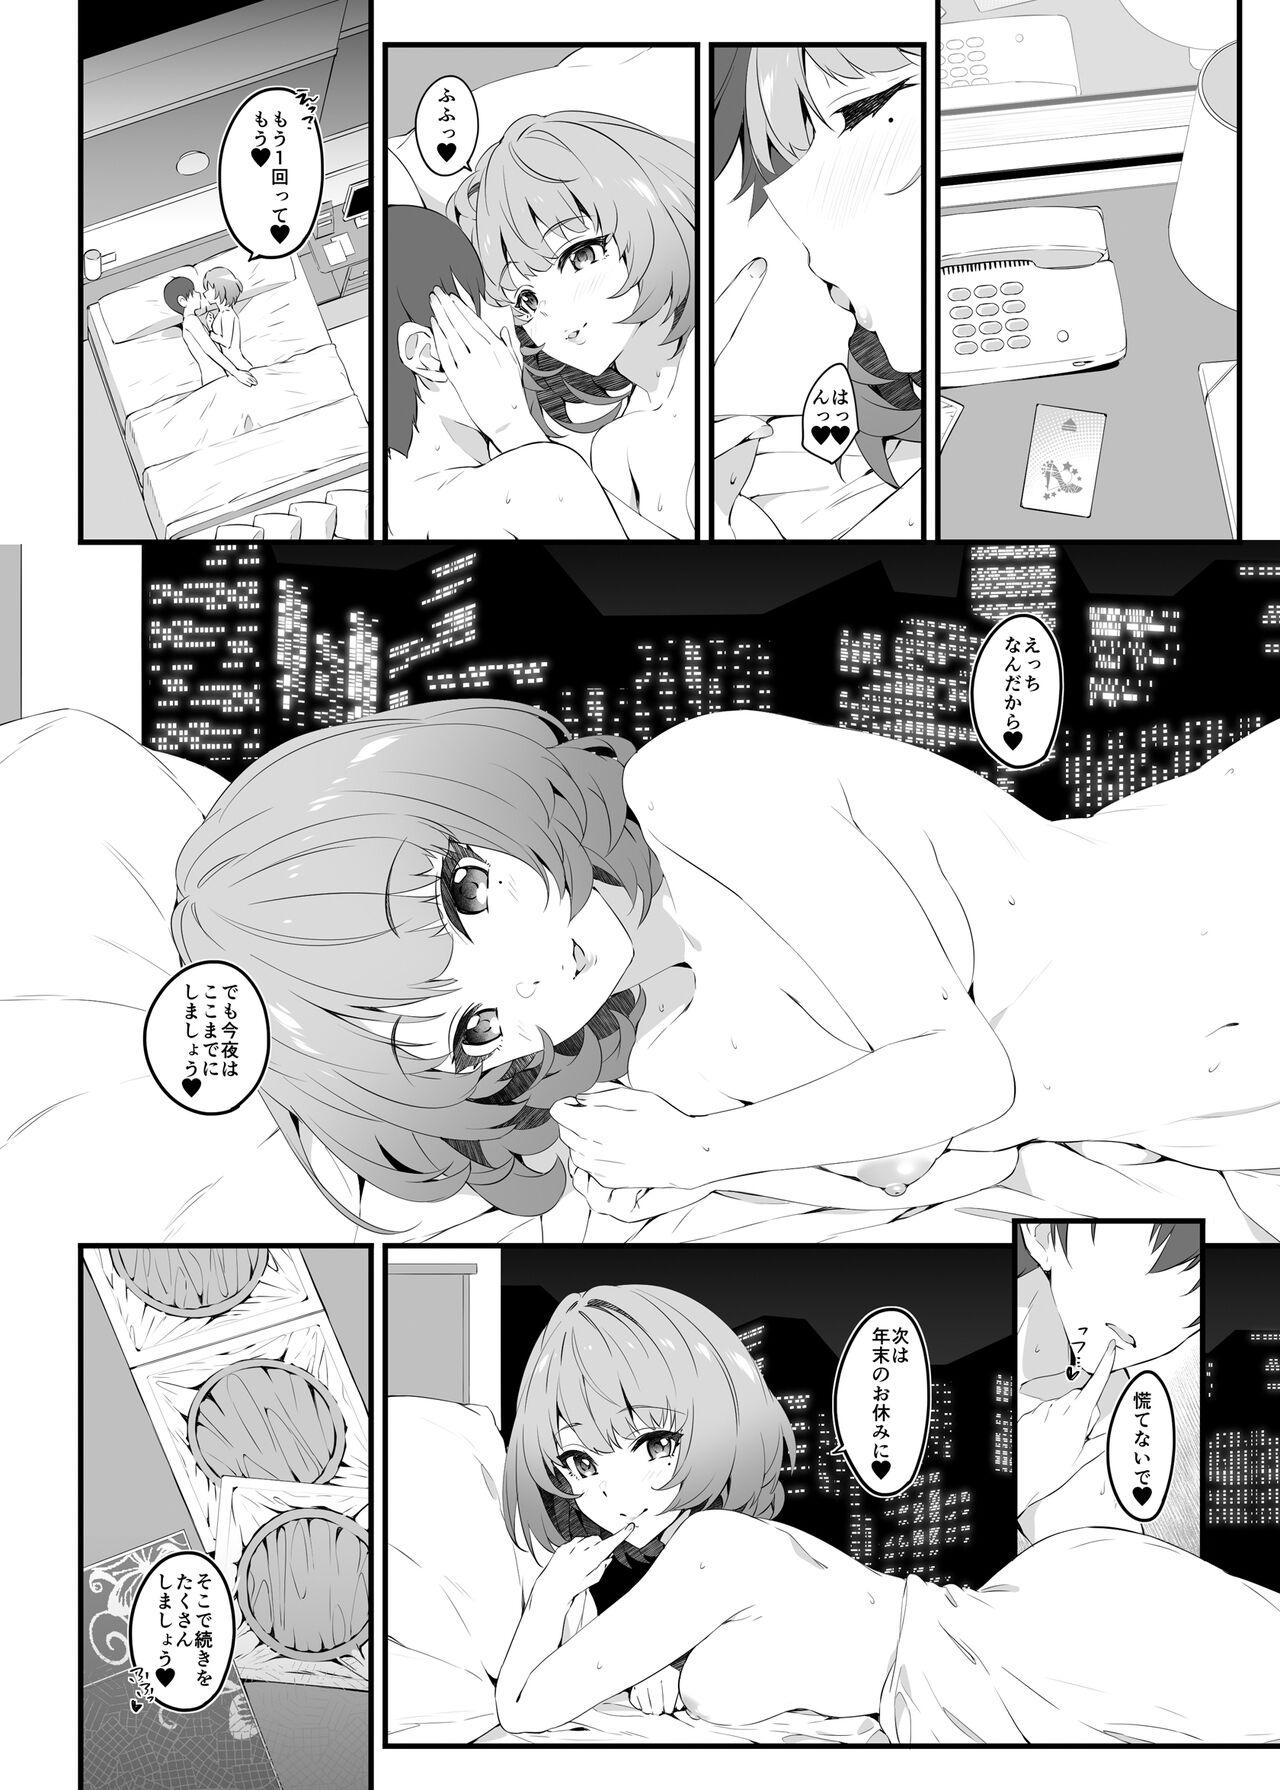 Panty Flowers blooming at night and the kings in the dream. - The idolmaster White Girl - Page 6